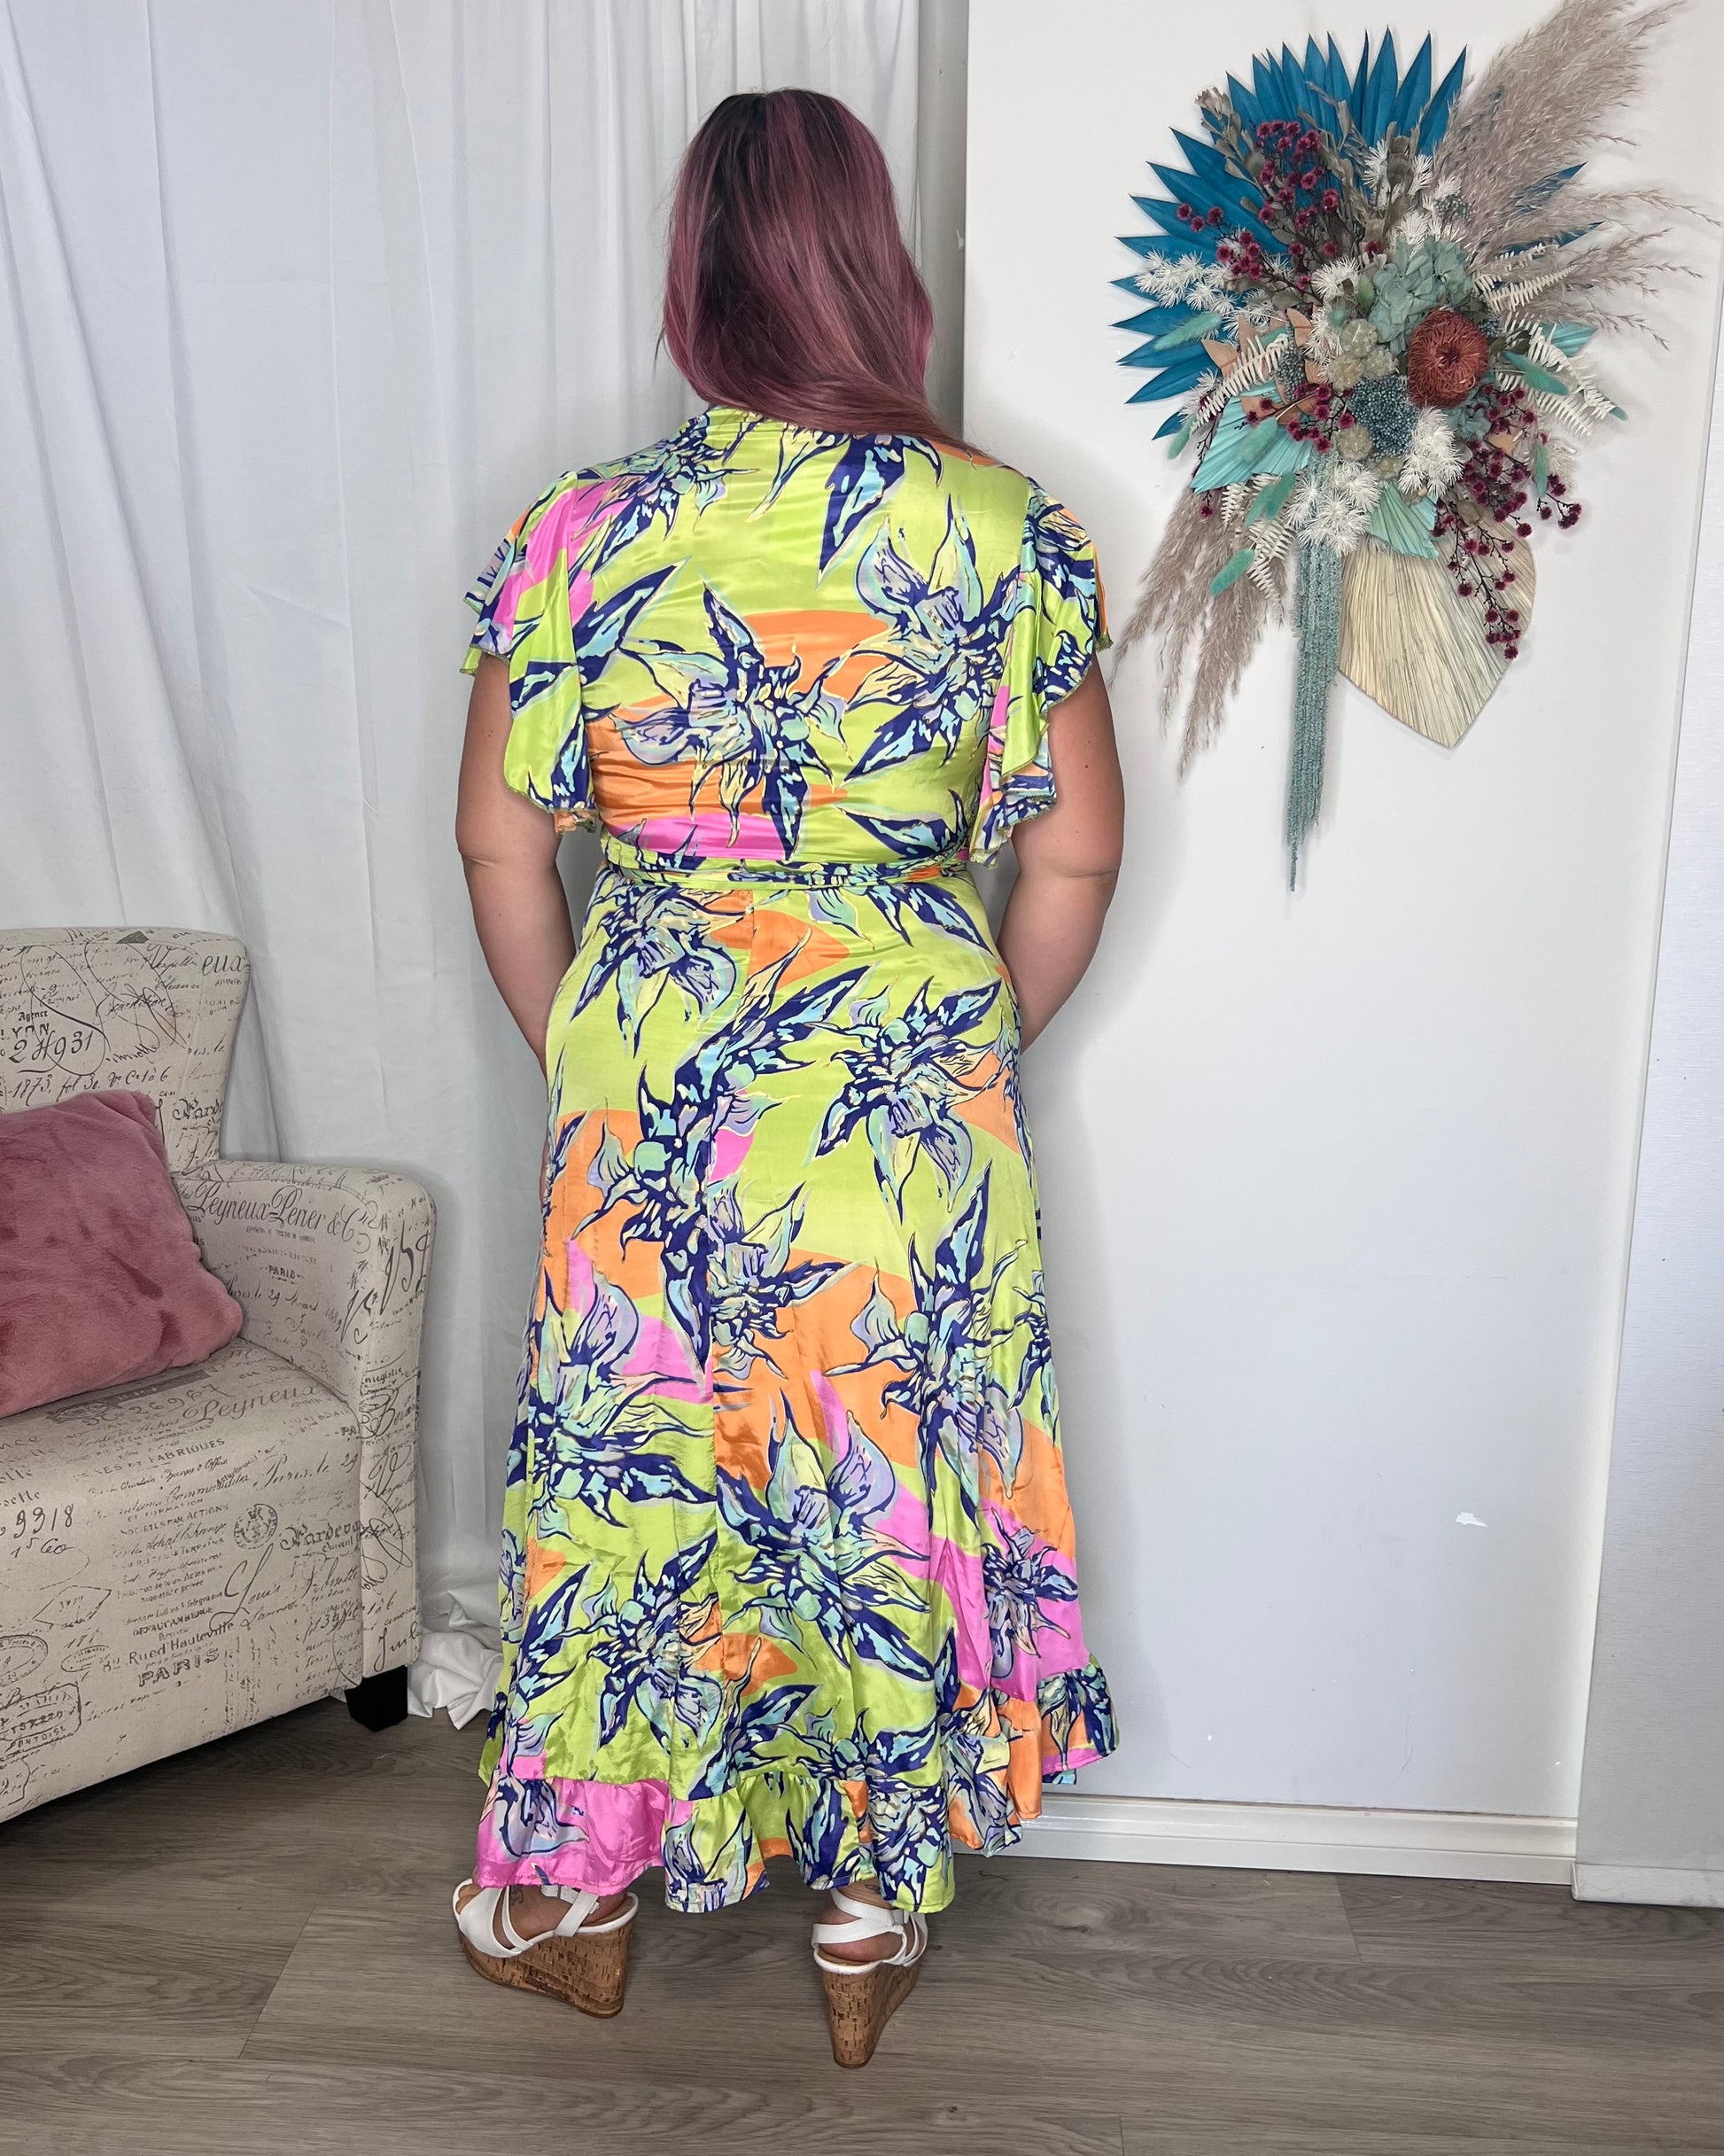 ***NEW*** Ava Wrap Midi Dress: Introducing the Ava Wrap Dress in the new Lime Print, perfect for adding a fresh pop of color to your wardrobe! This signature silk blend dress is bright and bold, m - Ciao Bella Dresses 